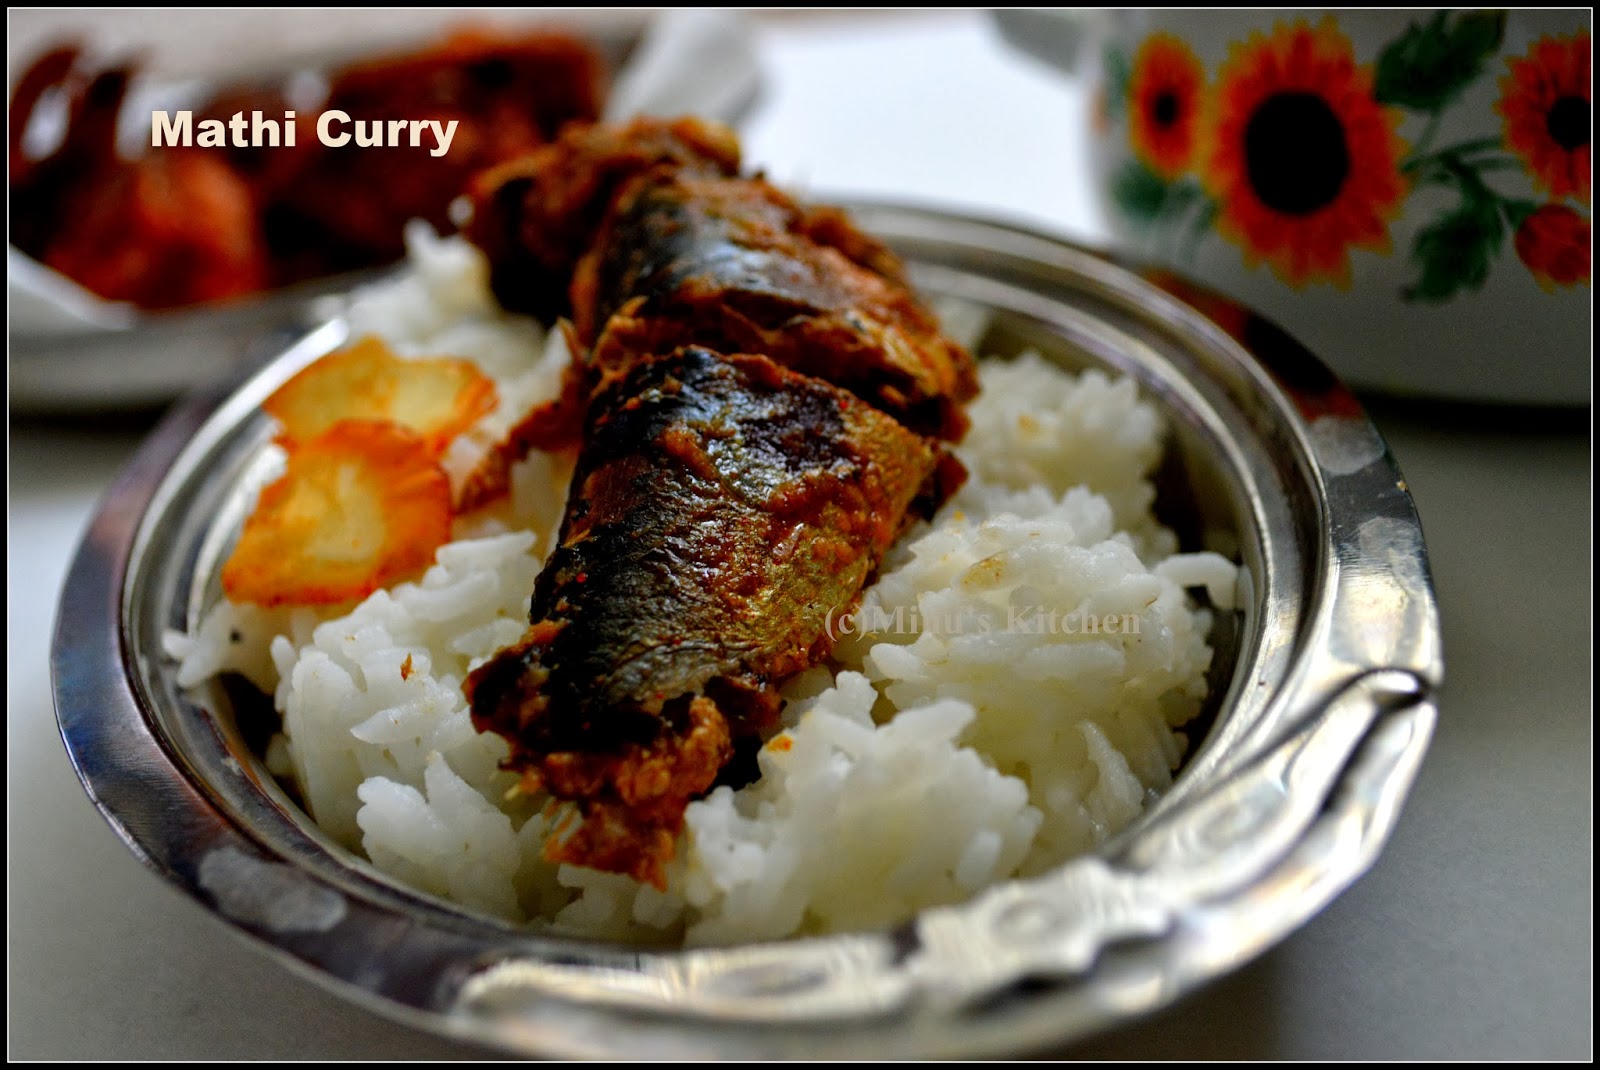 nadan mathi curry: sardines curry - traditional sardines curry